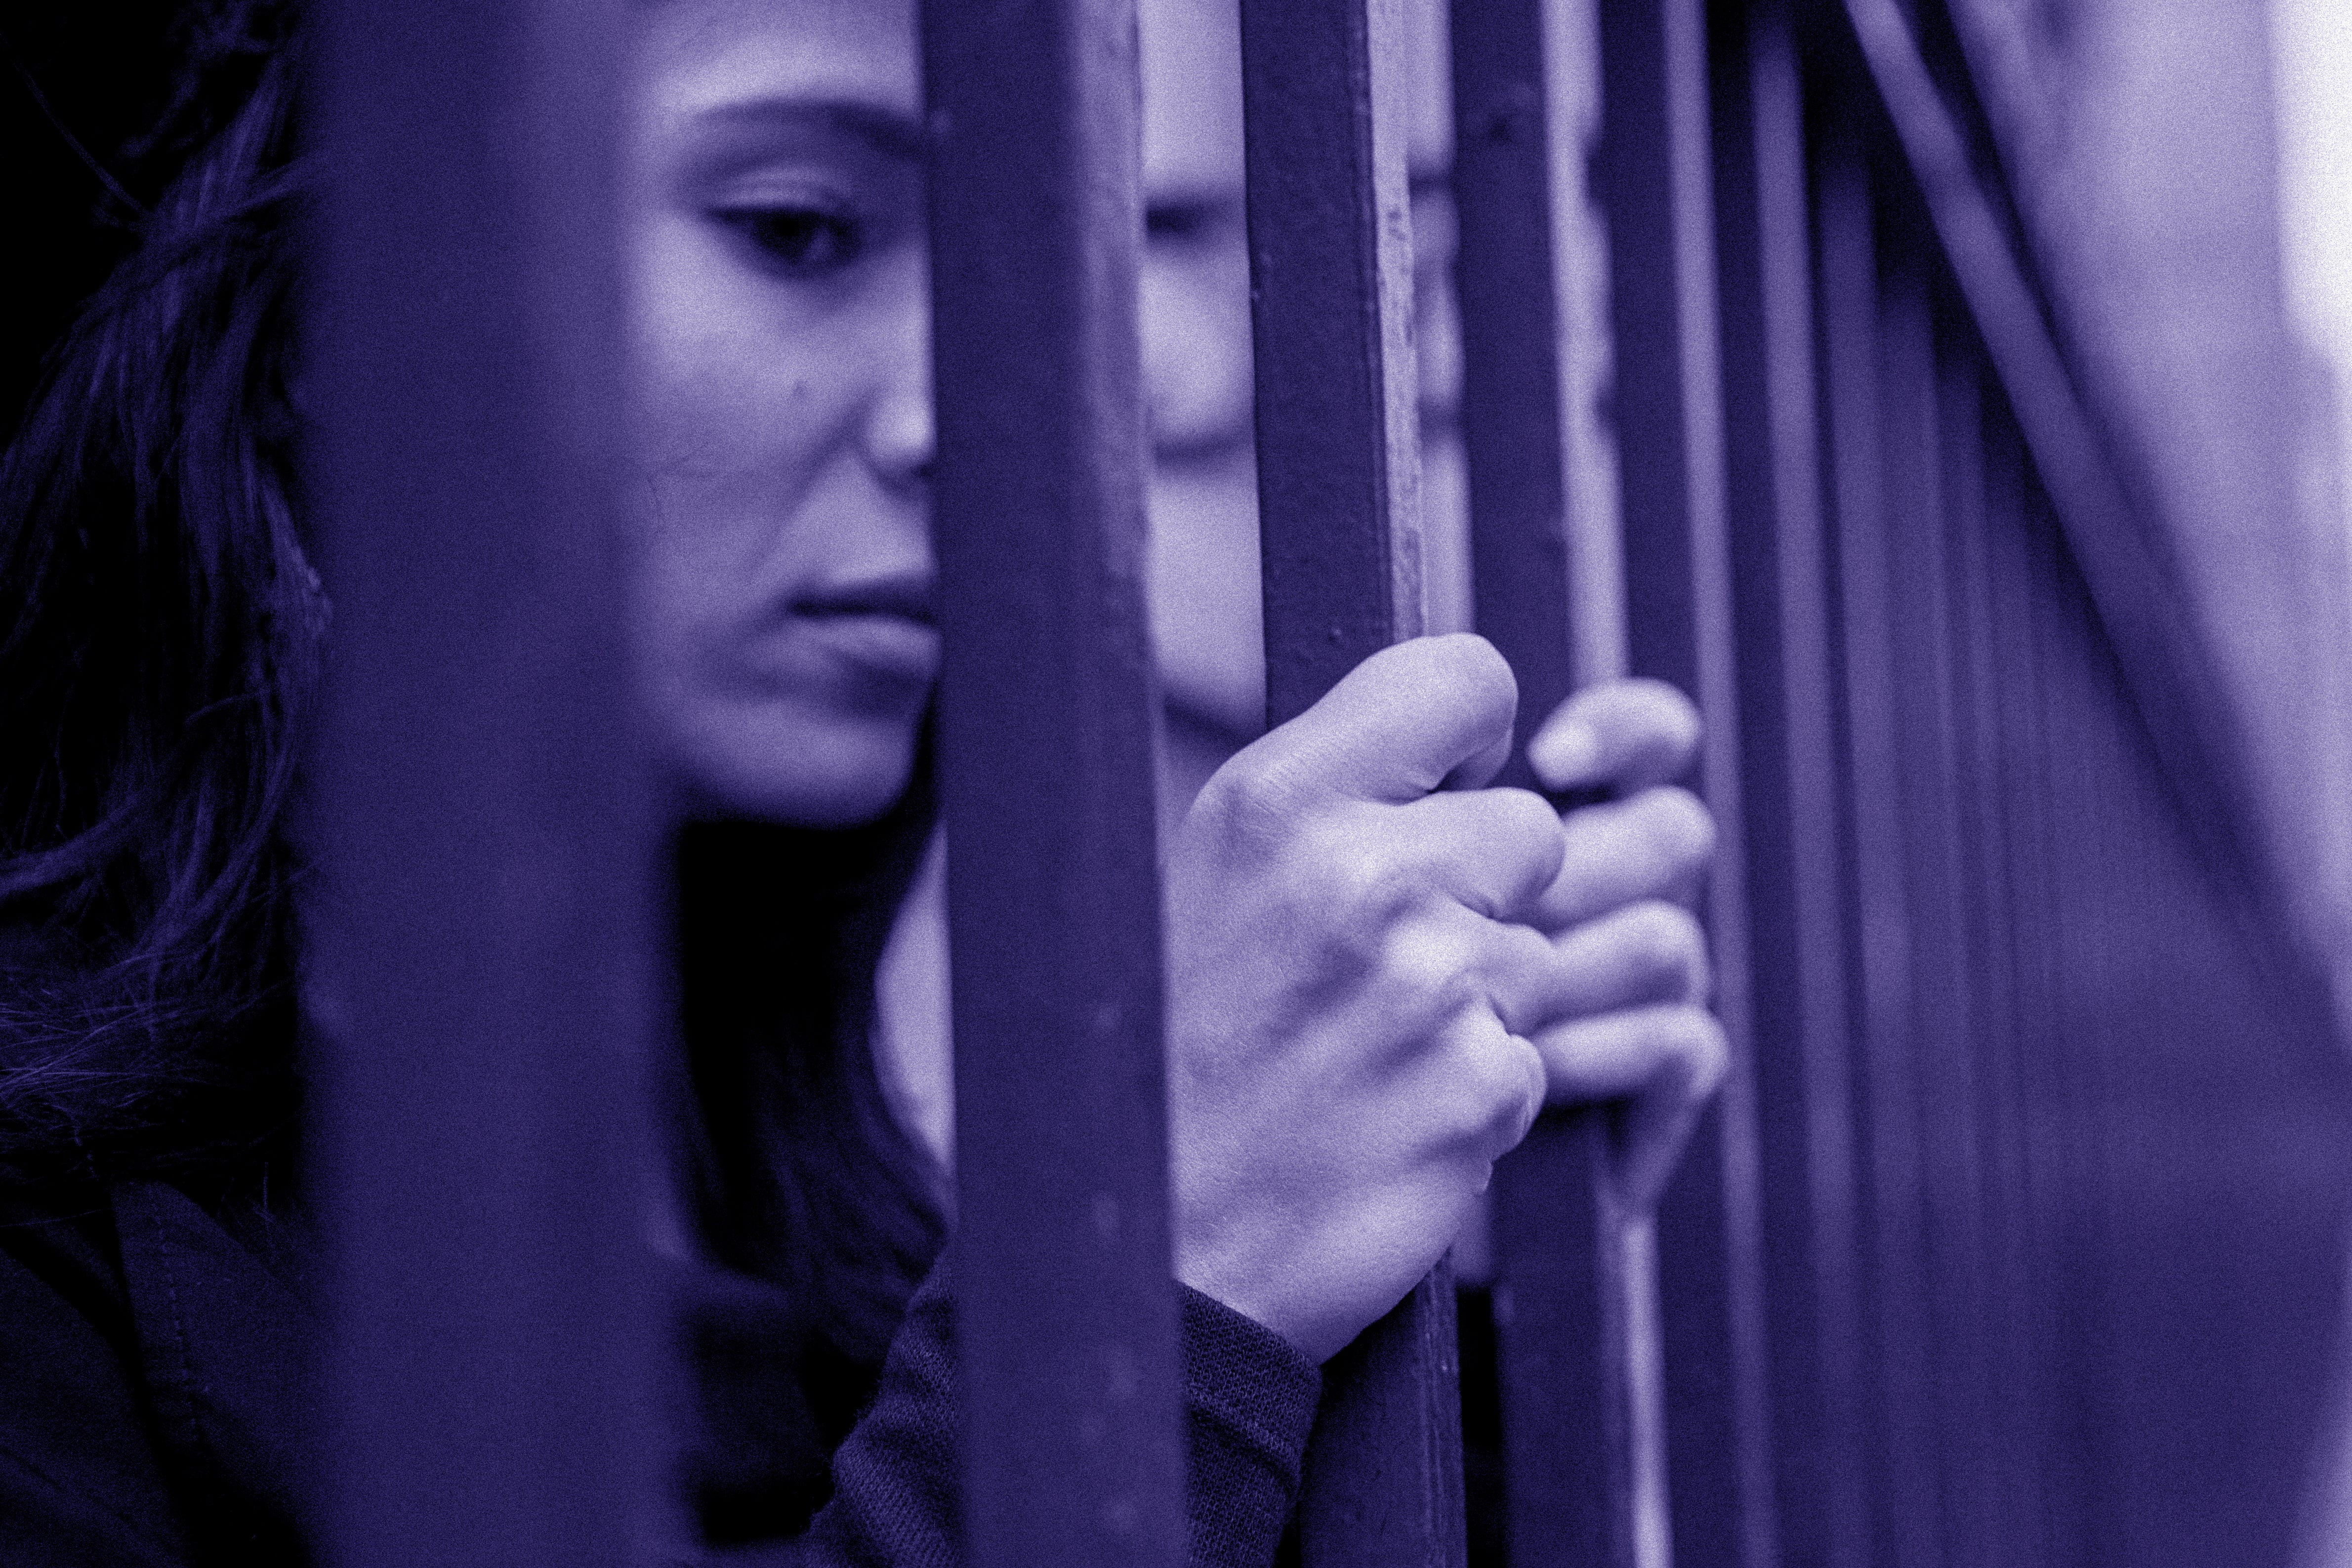 The self-harm rate among female IPP prisoners is more than 10 times the national average